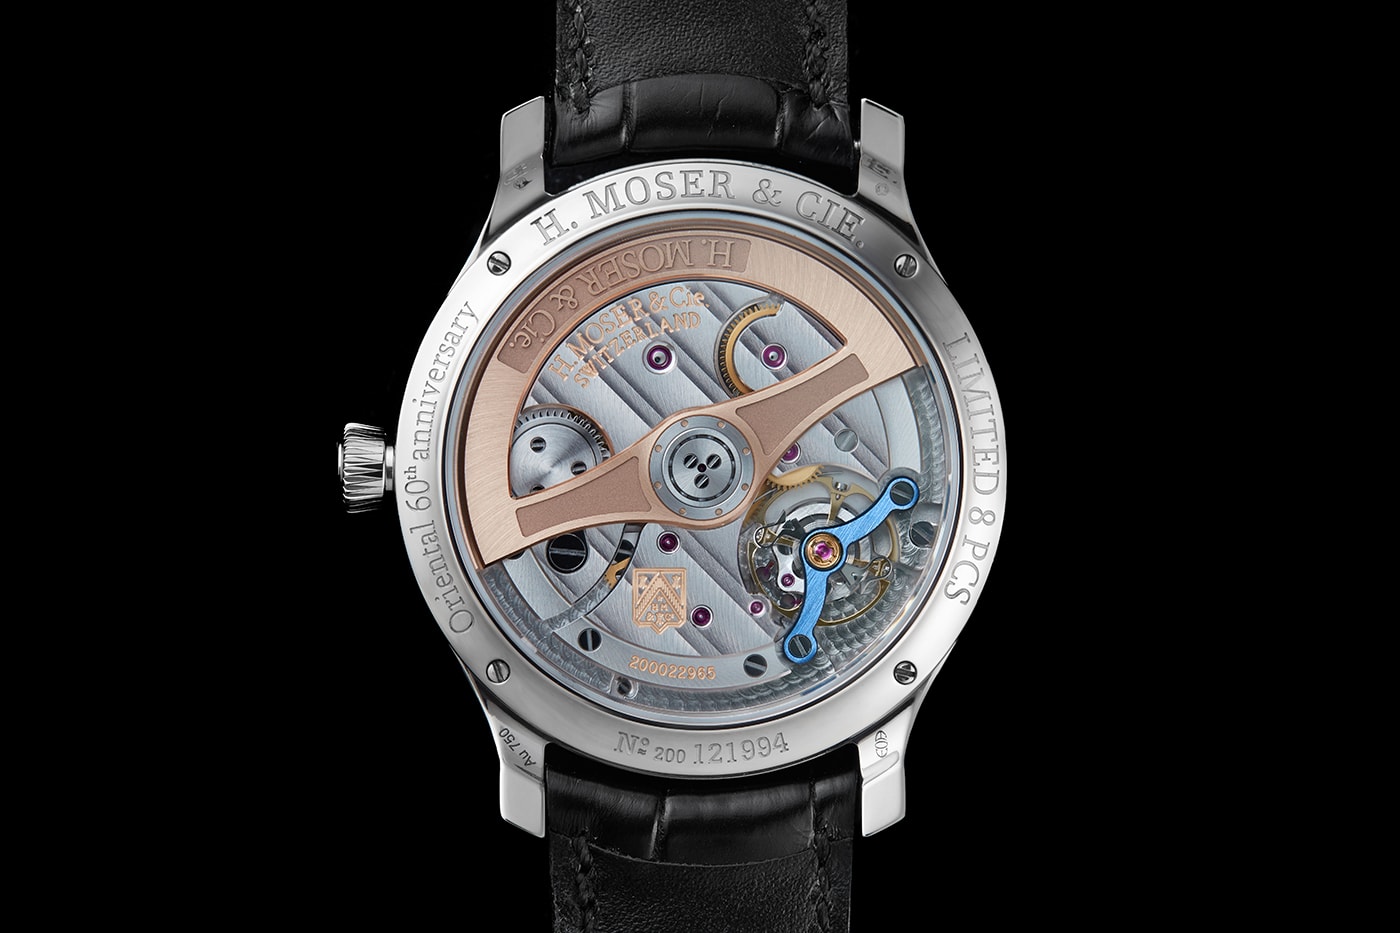 Endeavour Oriental Watch Company x H. Moser & Cie Endeavour watches Schaffhausen Hong Kong Swiss independent watchmaking retailer limited edition fume dial mayu 